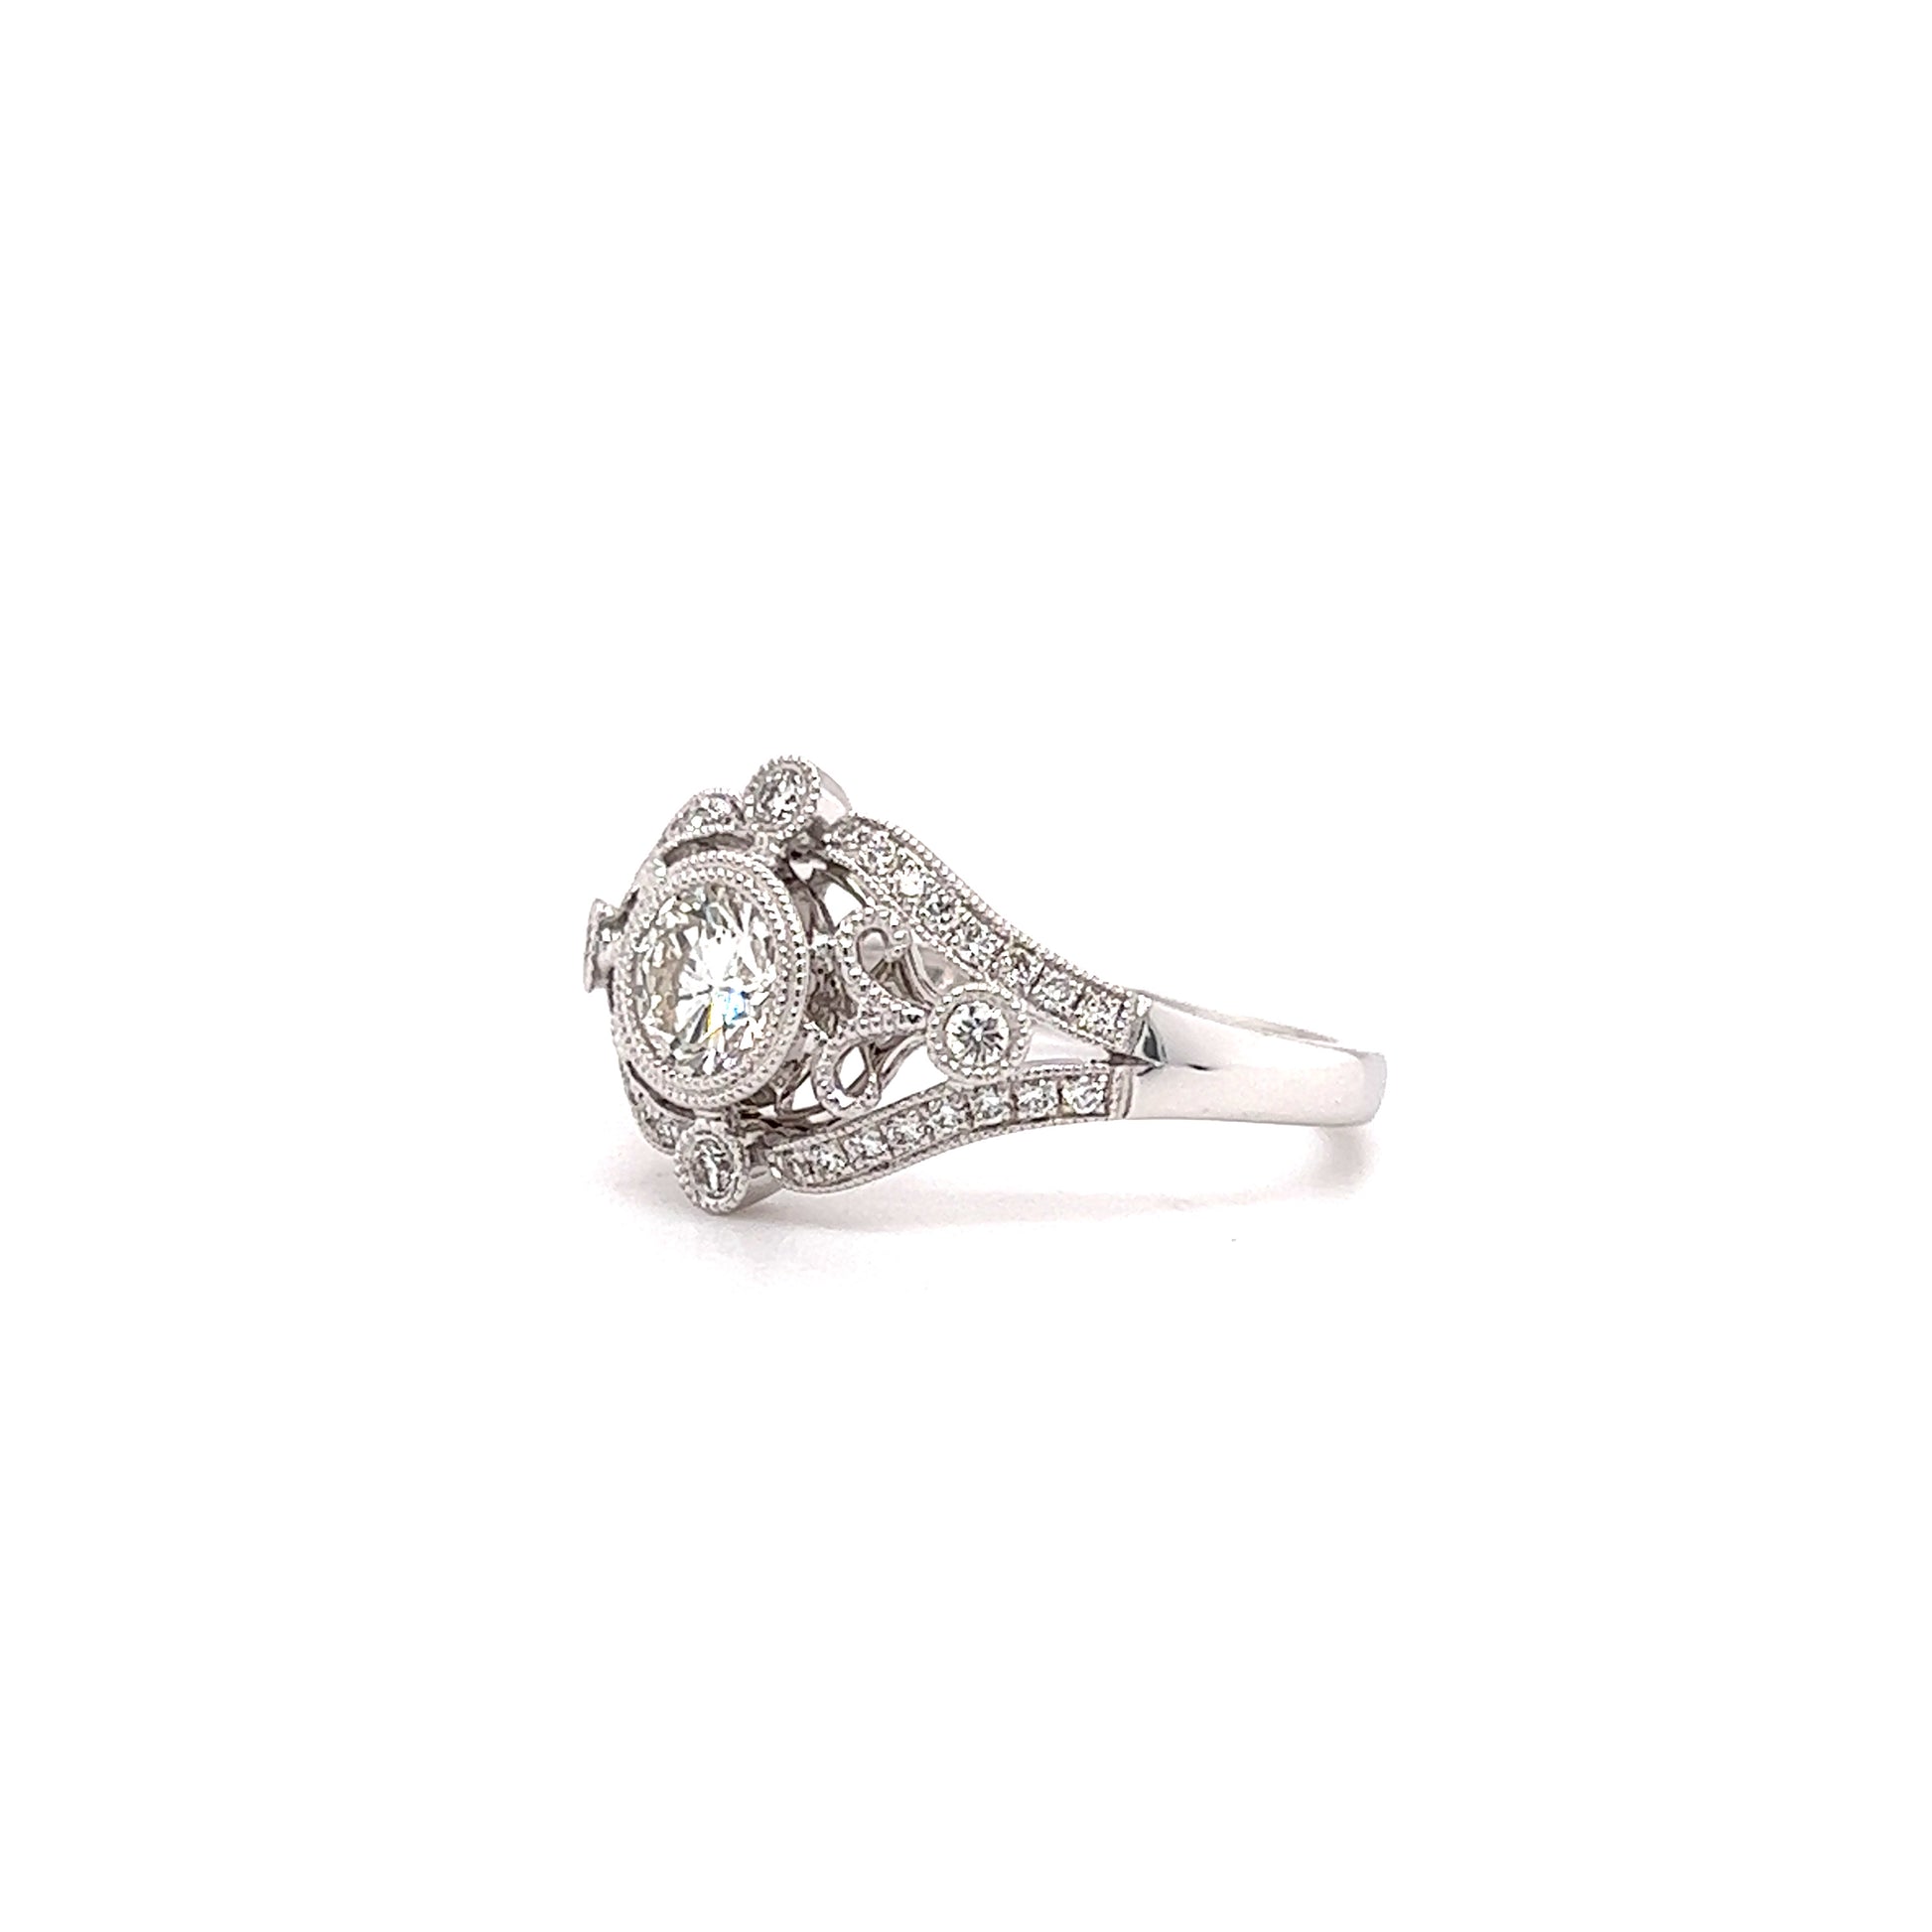 Round Diamond Ring with Side Diamonds and Filigree in 14K White Gold Right Side View